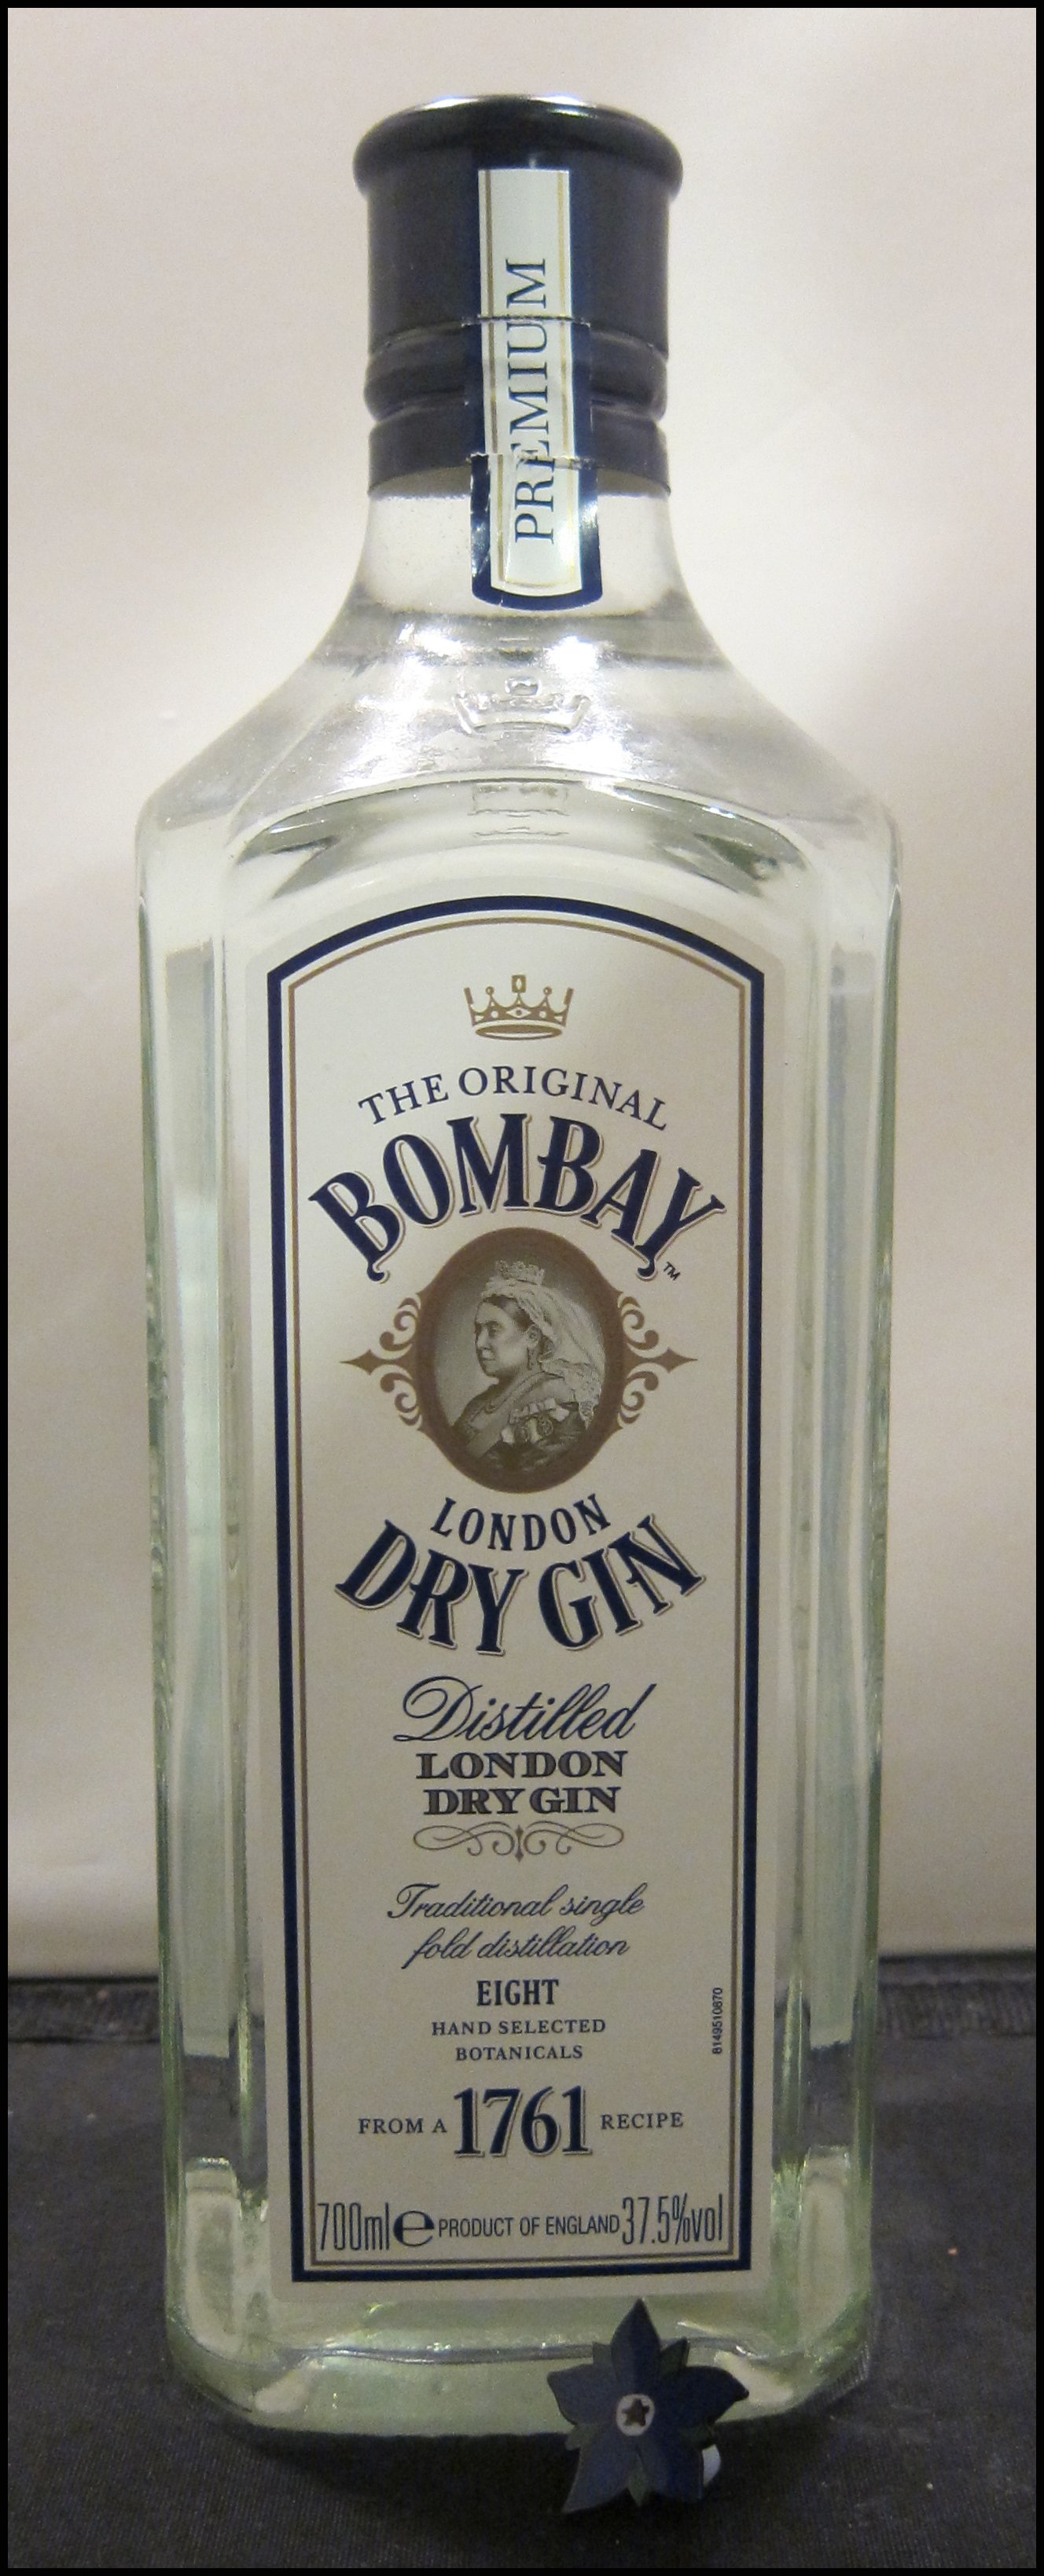 Cocktails with… Bombay Dry Gin (37.5% ABV) | Summer Fruit Cup | Gin